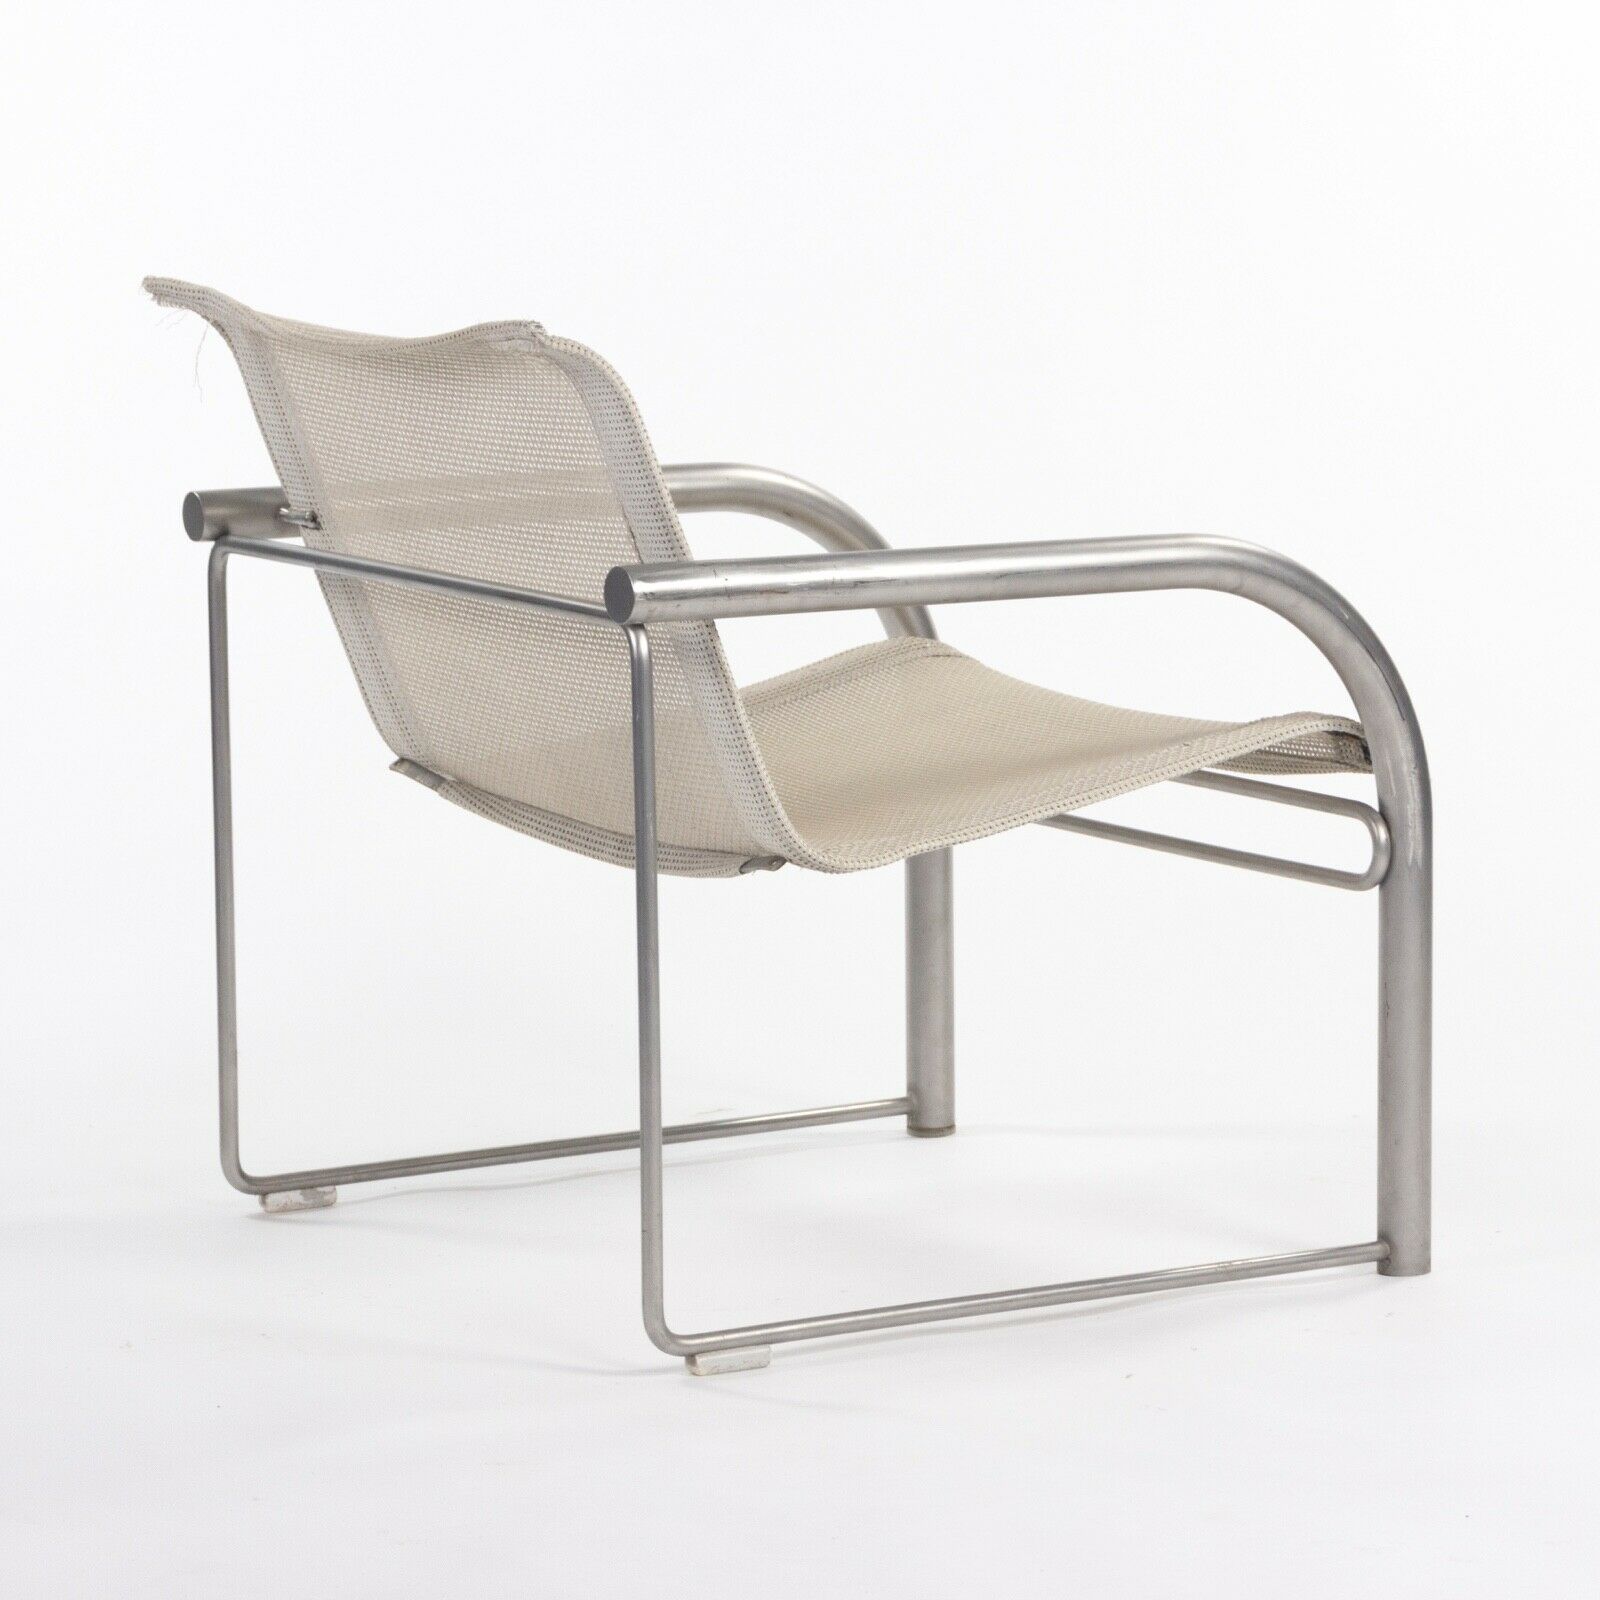 SOLD 1980 Prototype Richard Schultz for Knoll Stainless Steel & Mesh Lounge Chair